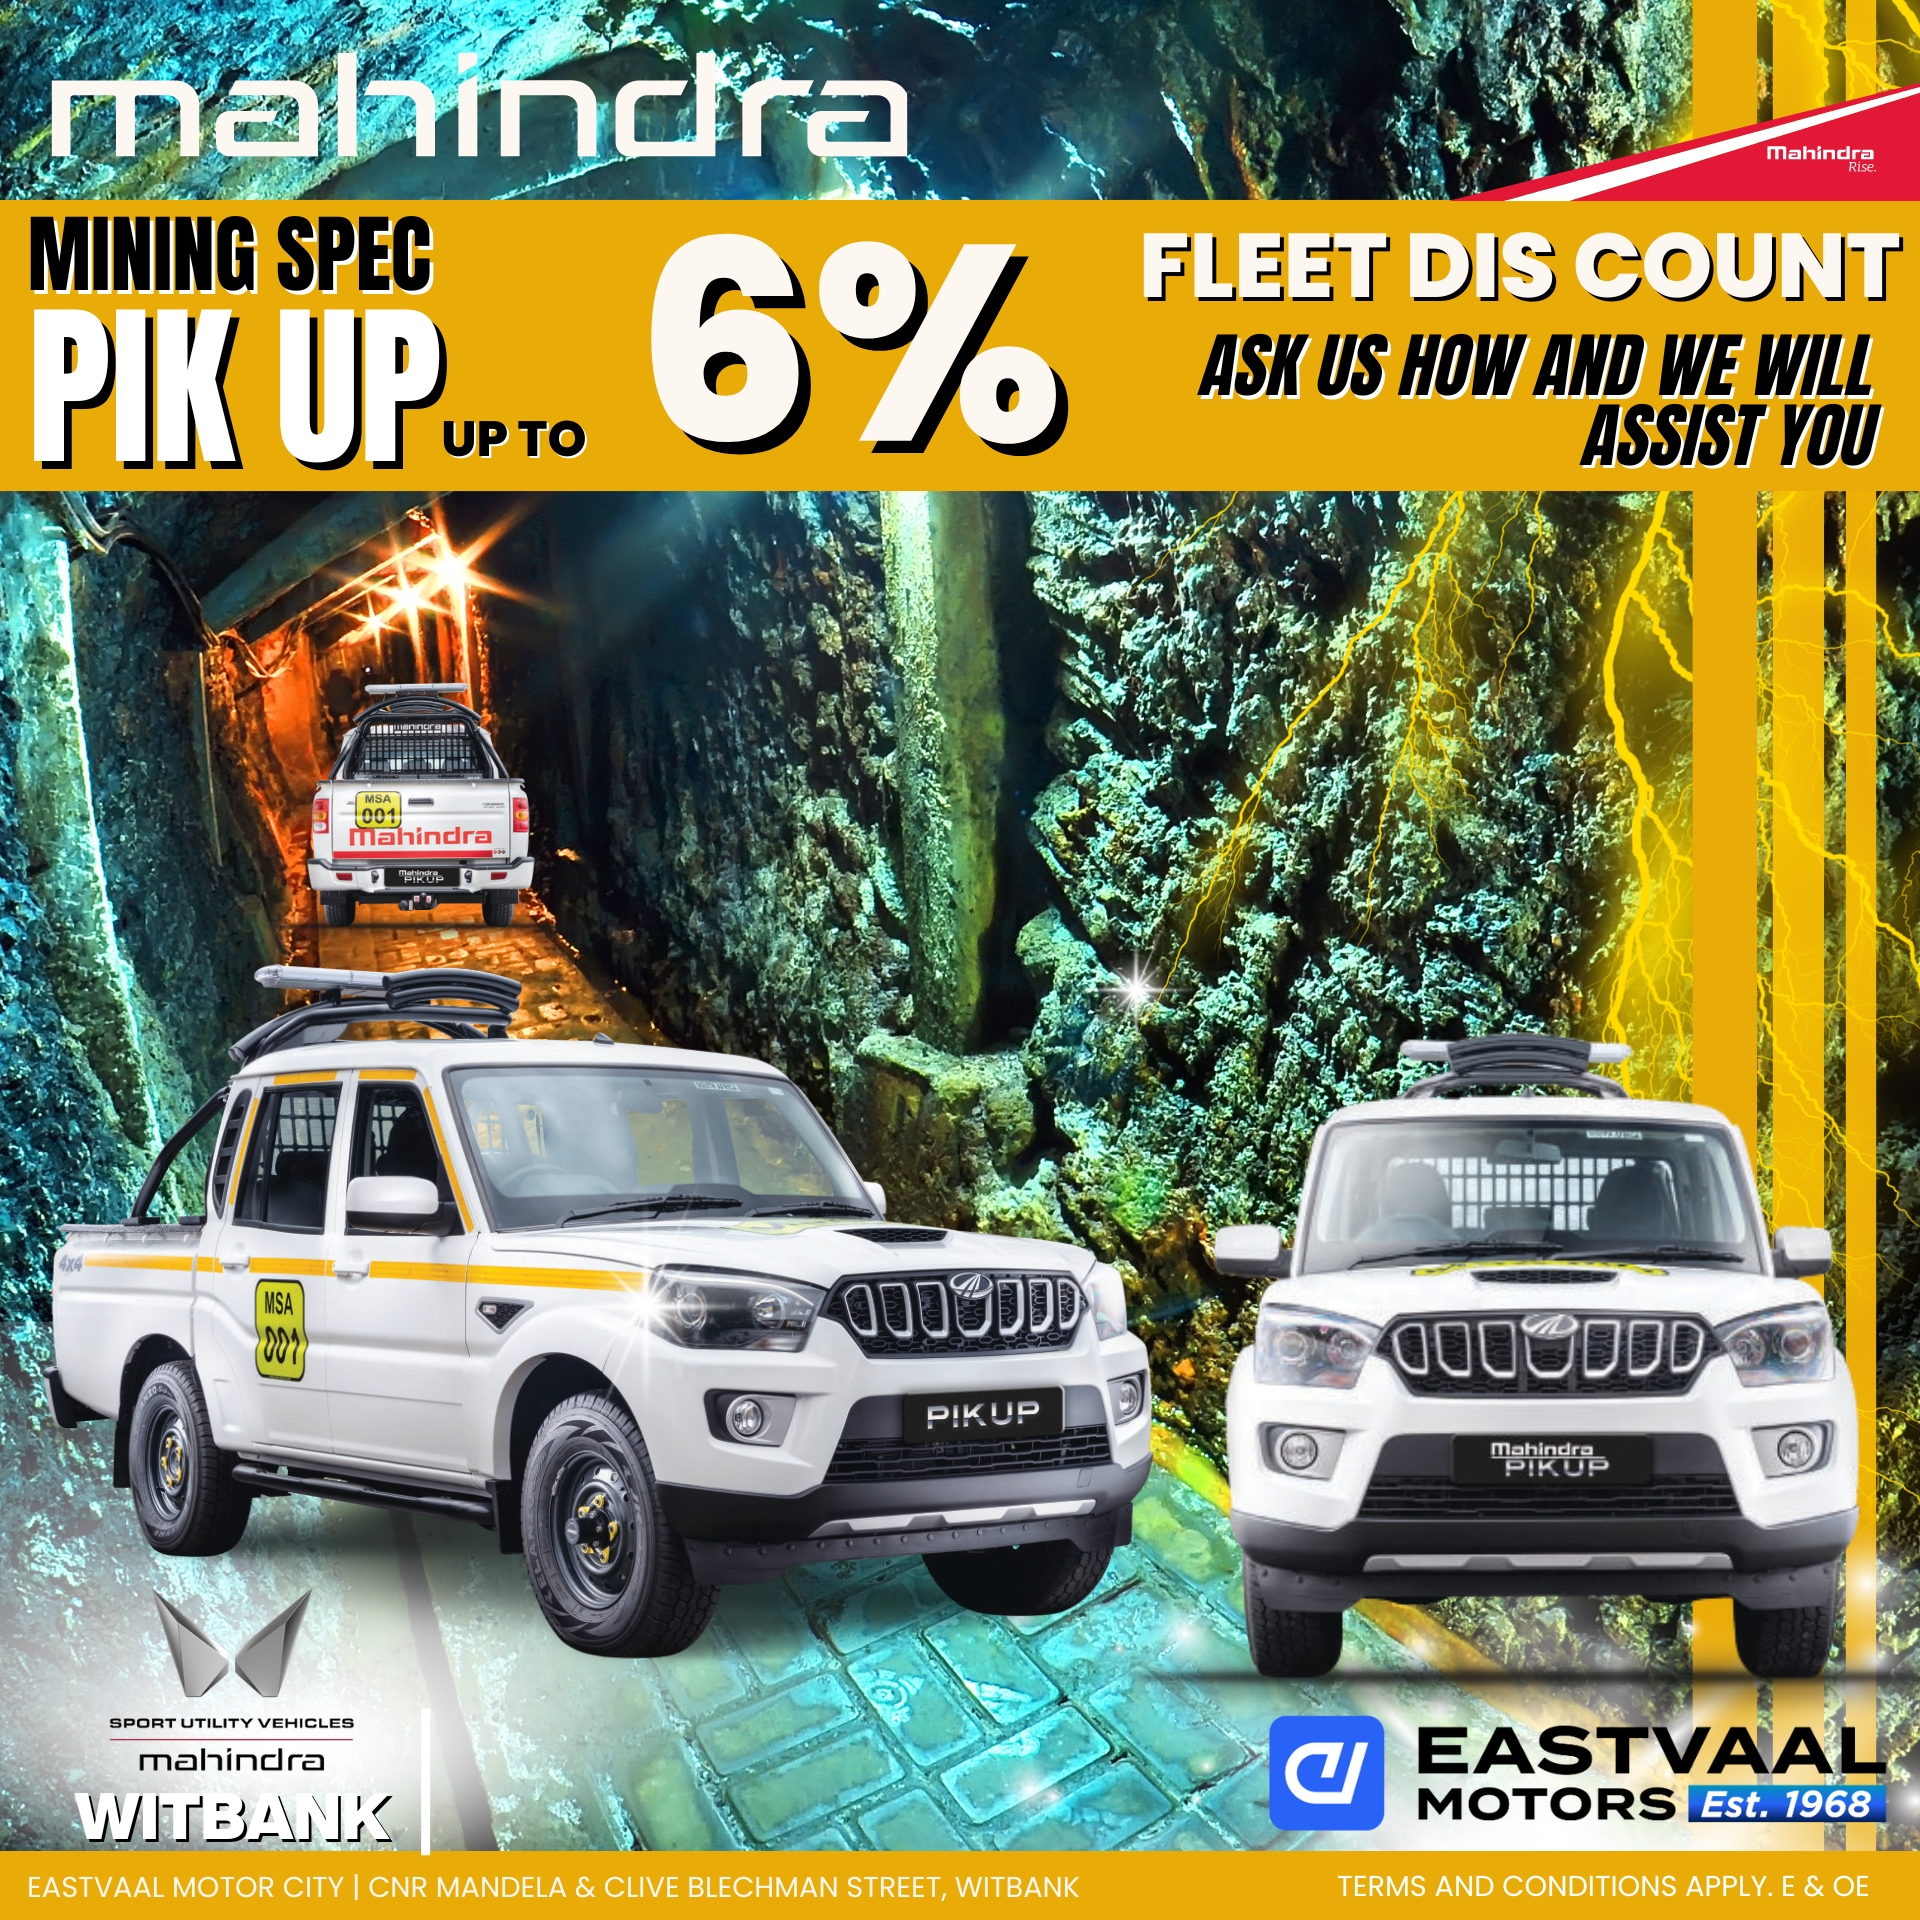 Upgrade your ride this July with a Mahindra from Eastvaal Motor City. Special prices await! image from 